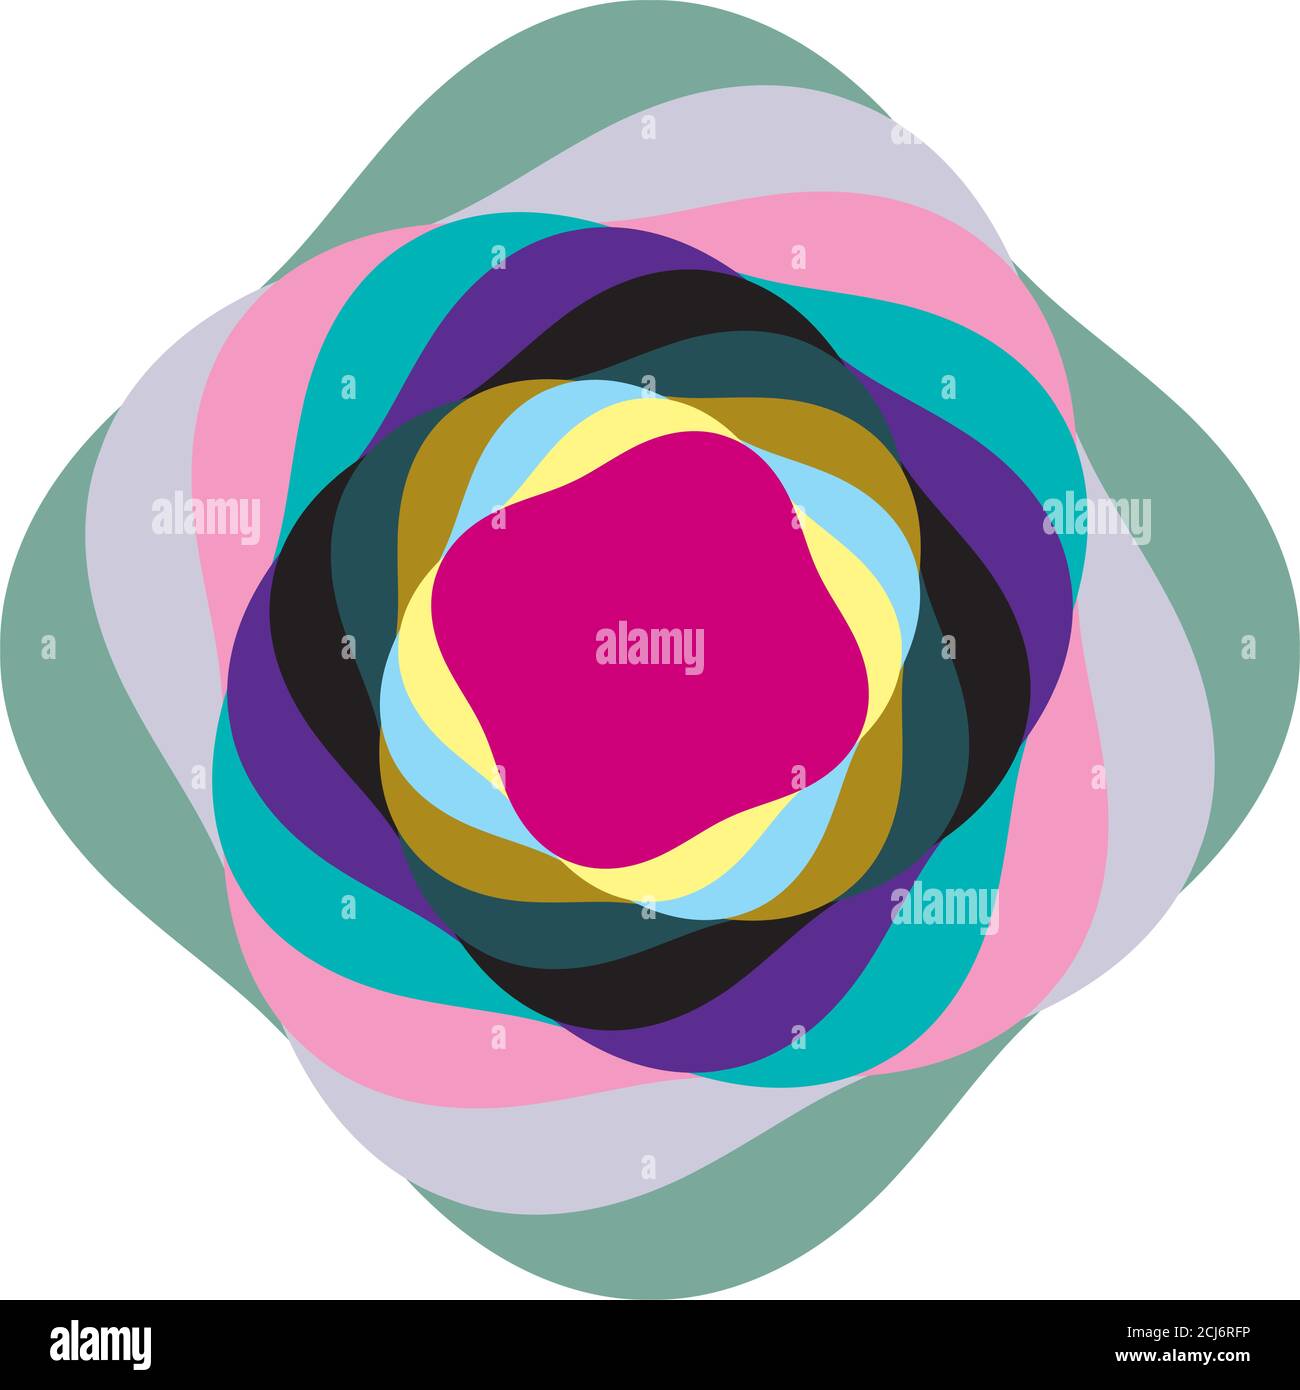 Multi-color abstract radial, concentric spiral, swirl, twirl and vortex shapes. Design elements with rotation, gyre, torsion effect. Abstract circular Stock Vector